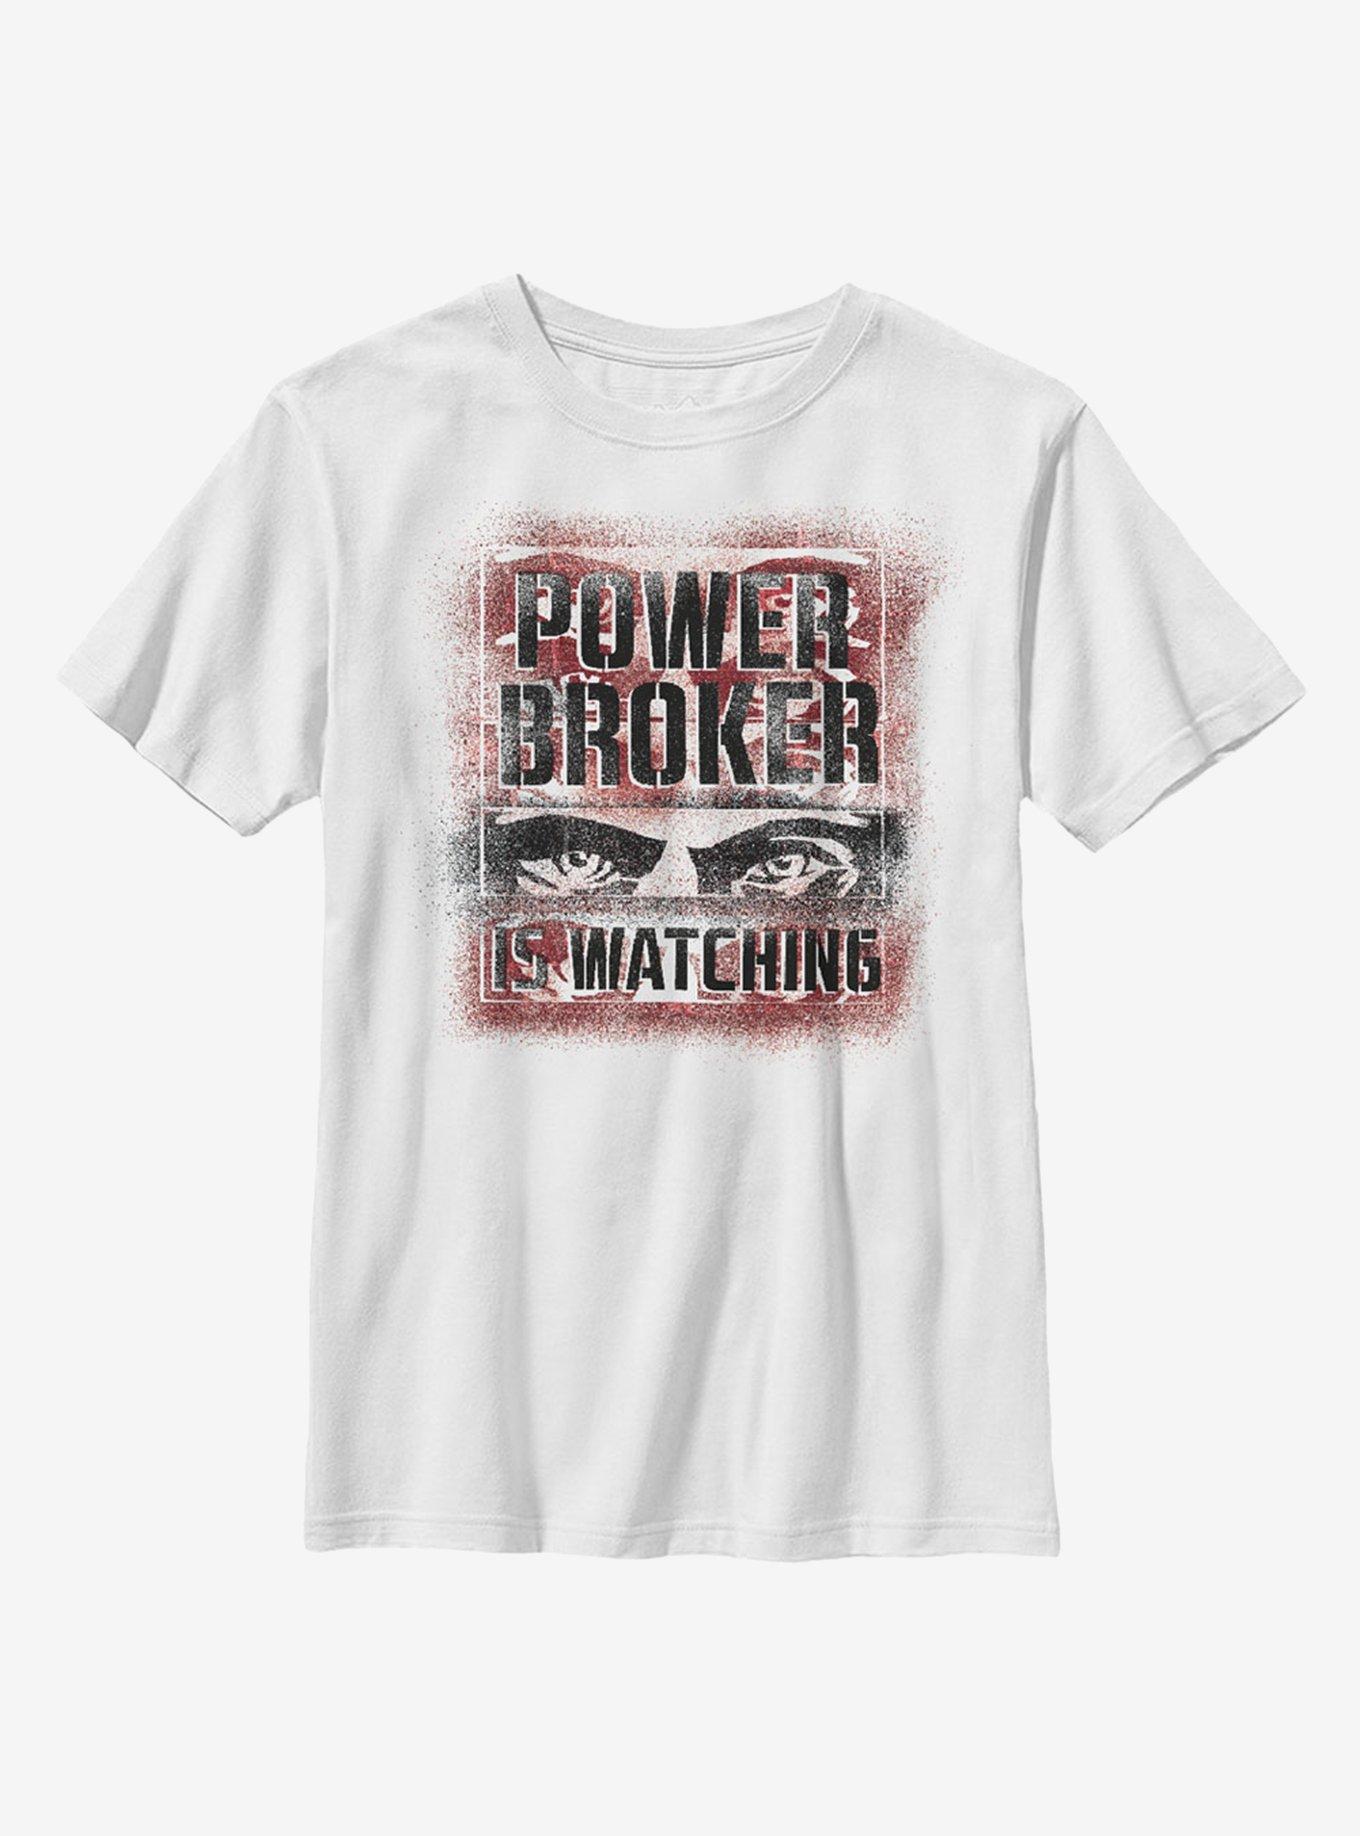 Marvel The Falcon And The Winter Soldier Power Broker Is Watching Youth T-Shirt, WHITE, hi-res